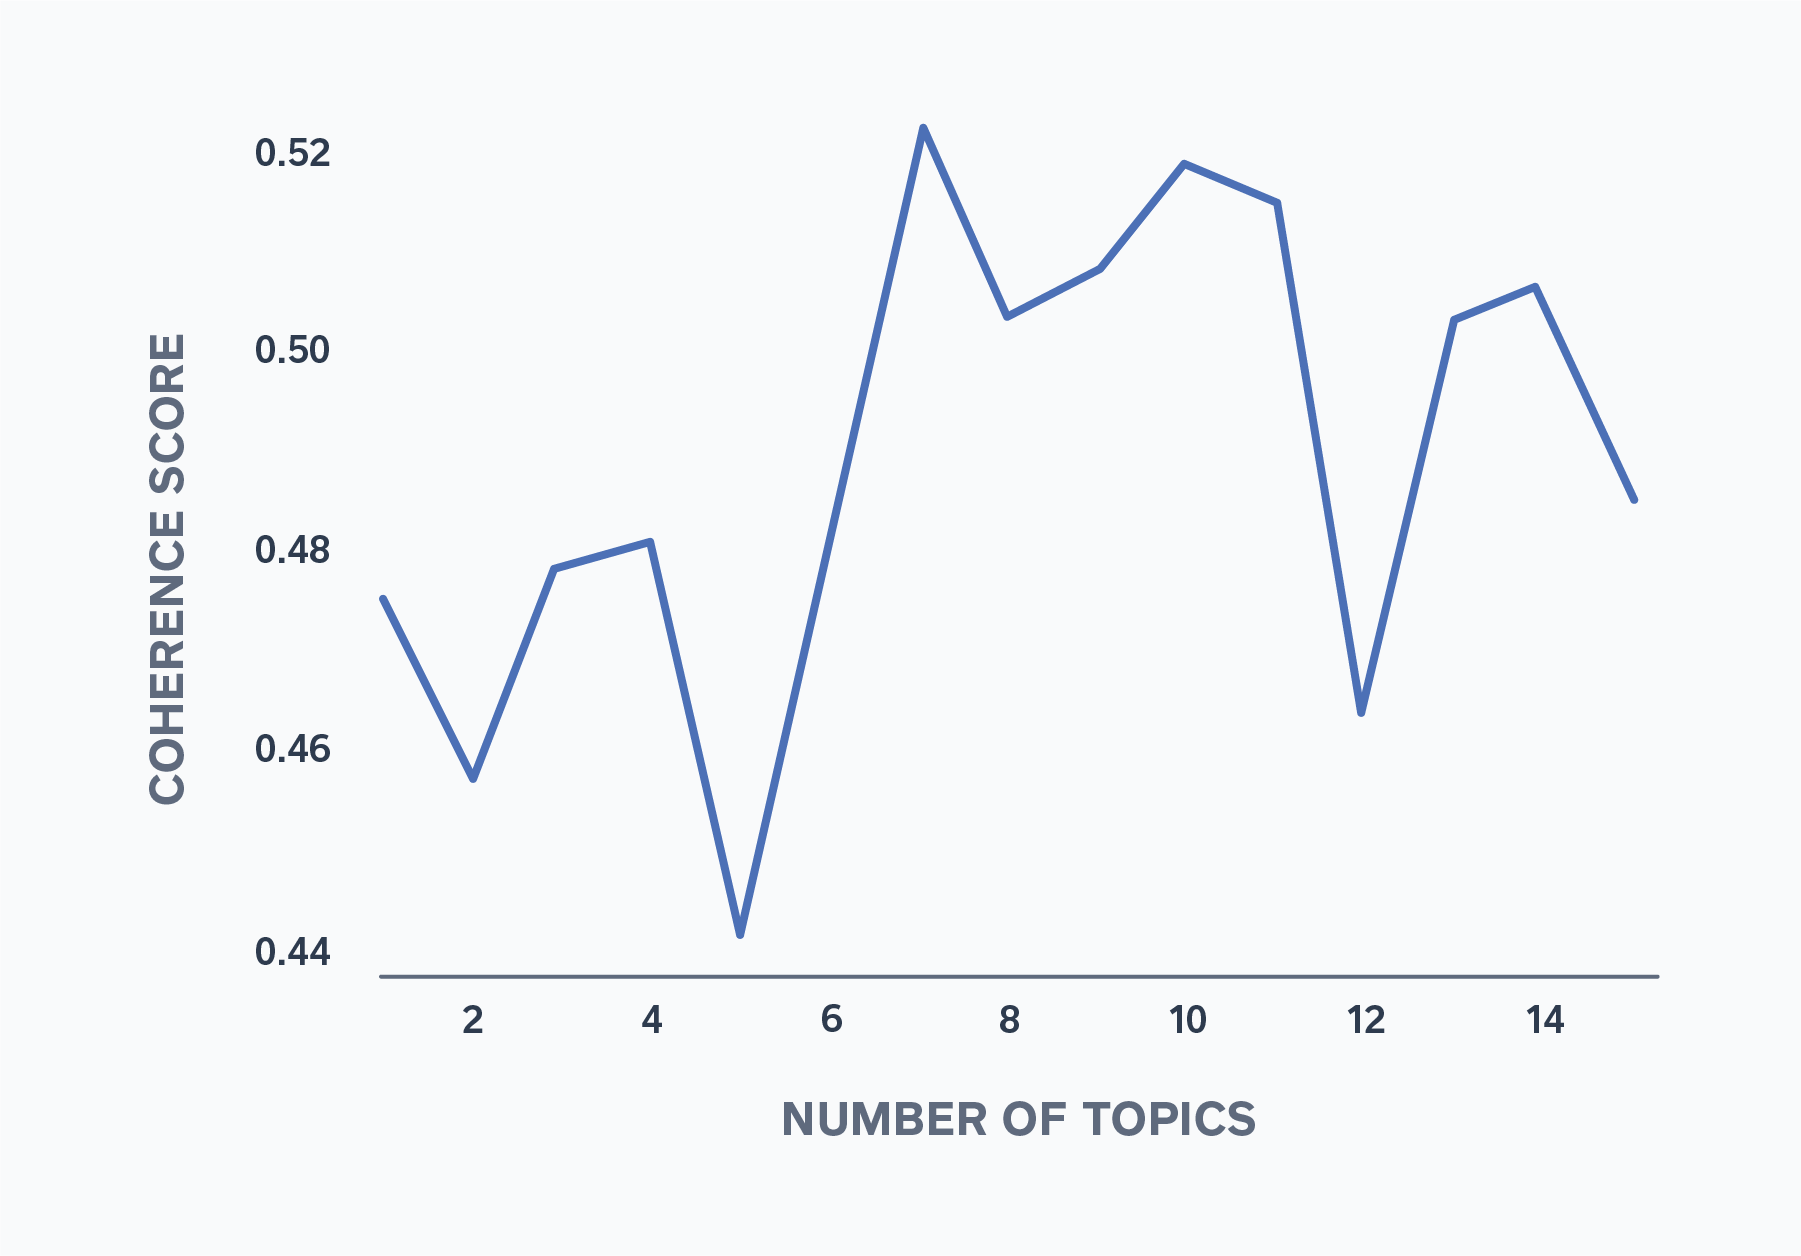 Figure 3: Coherence Score Across Number of Topics